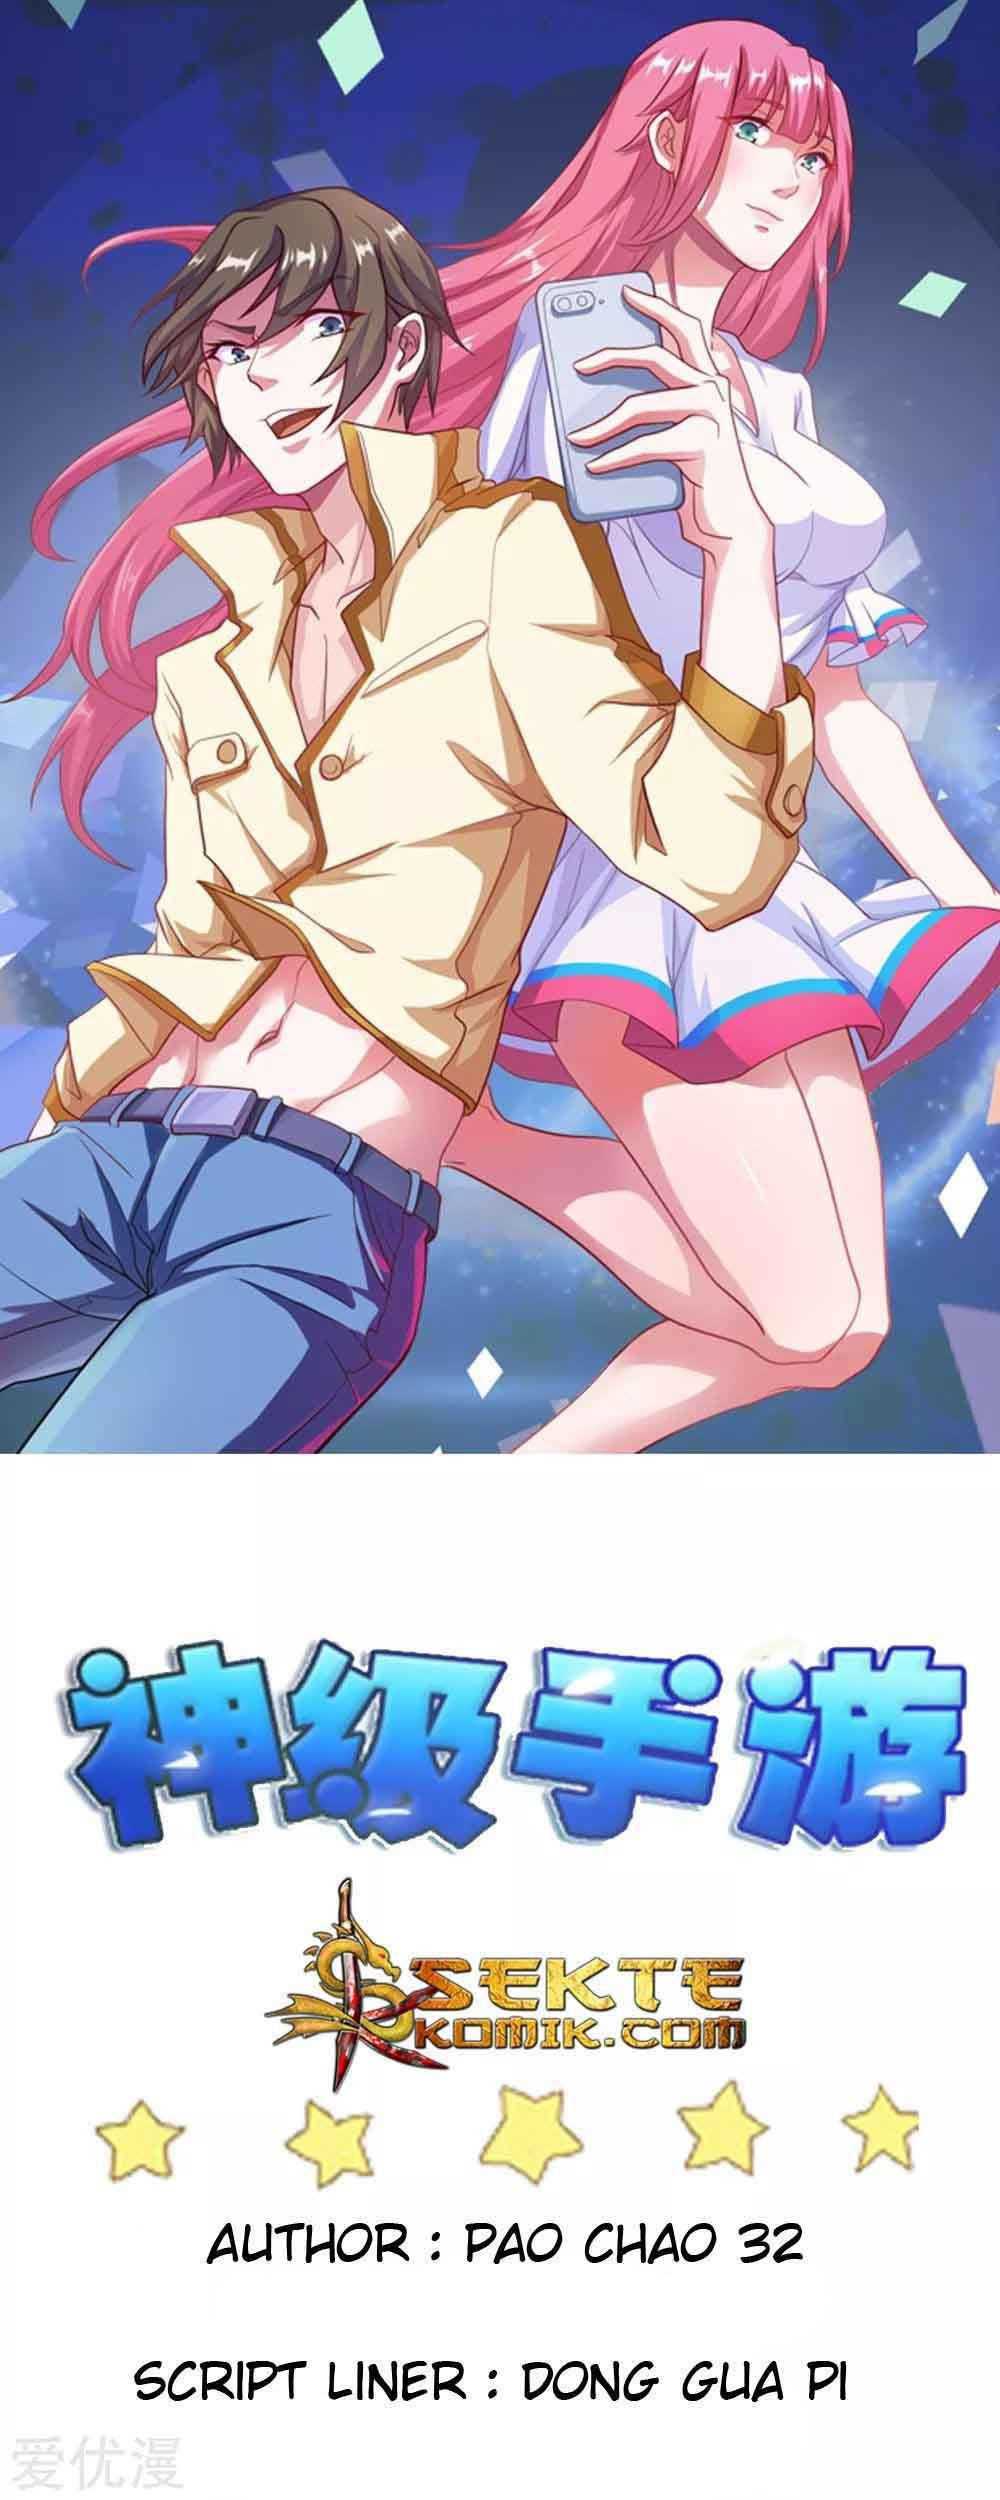 Godly Mobile Game Chapter 23